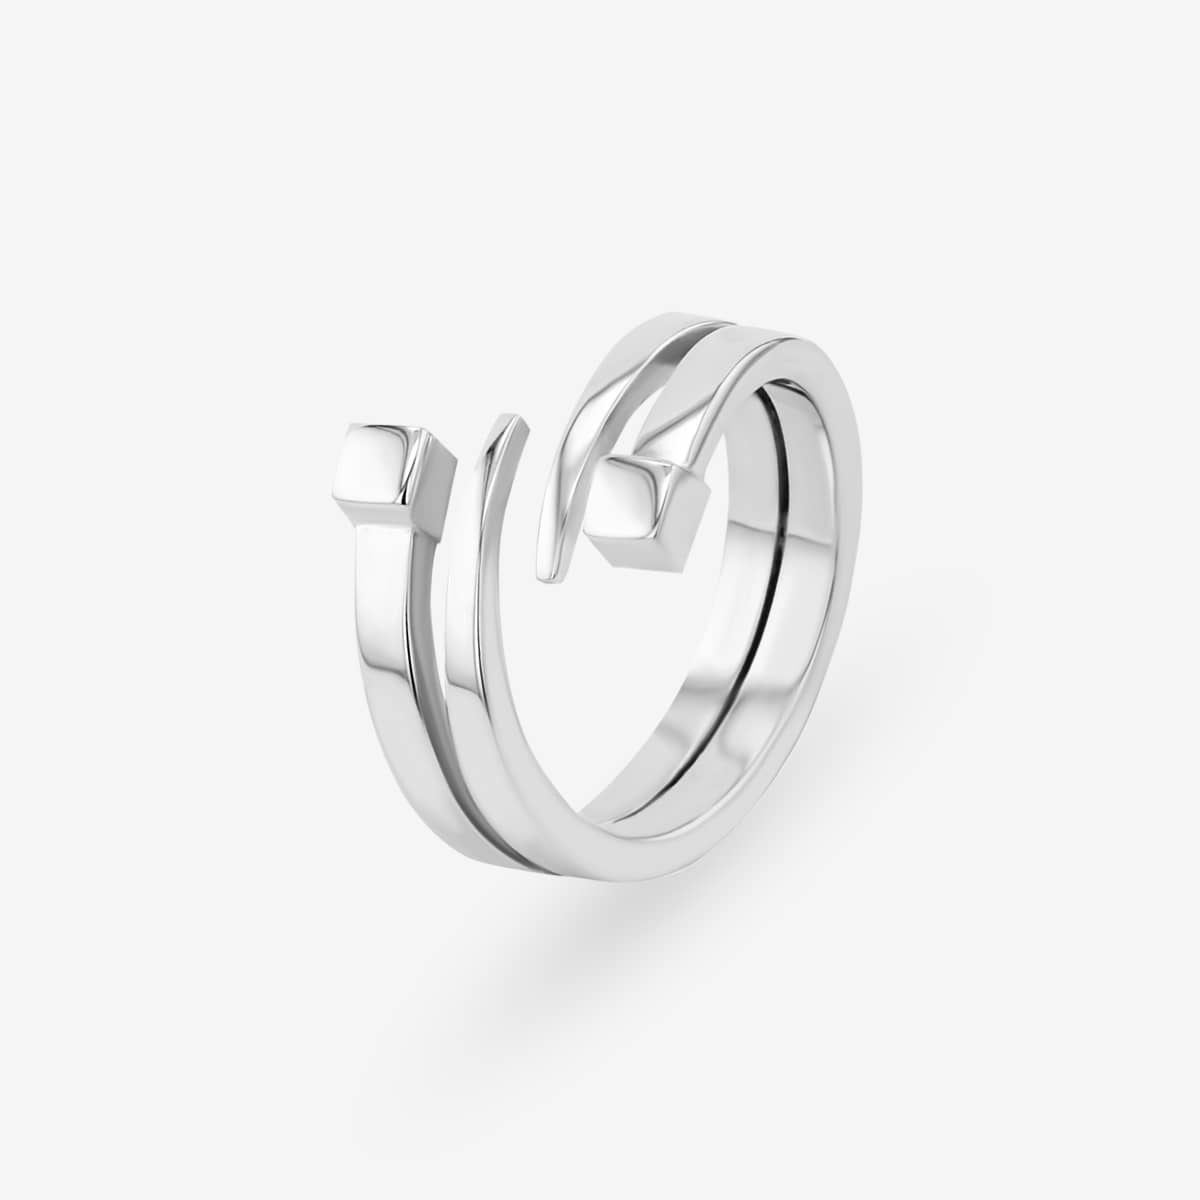 THE DIVIN NAIL DOUBLE RING